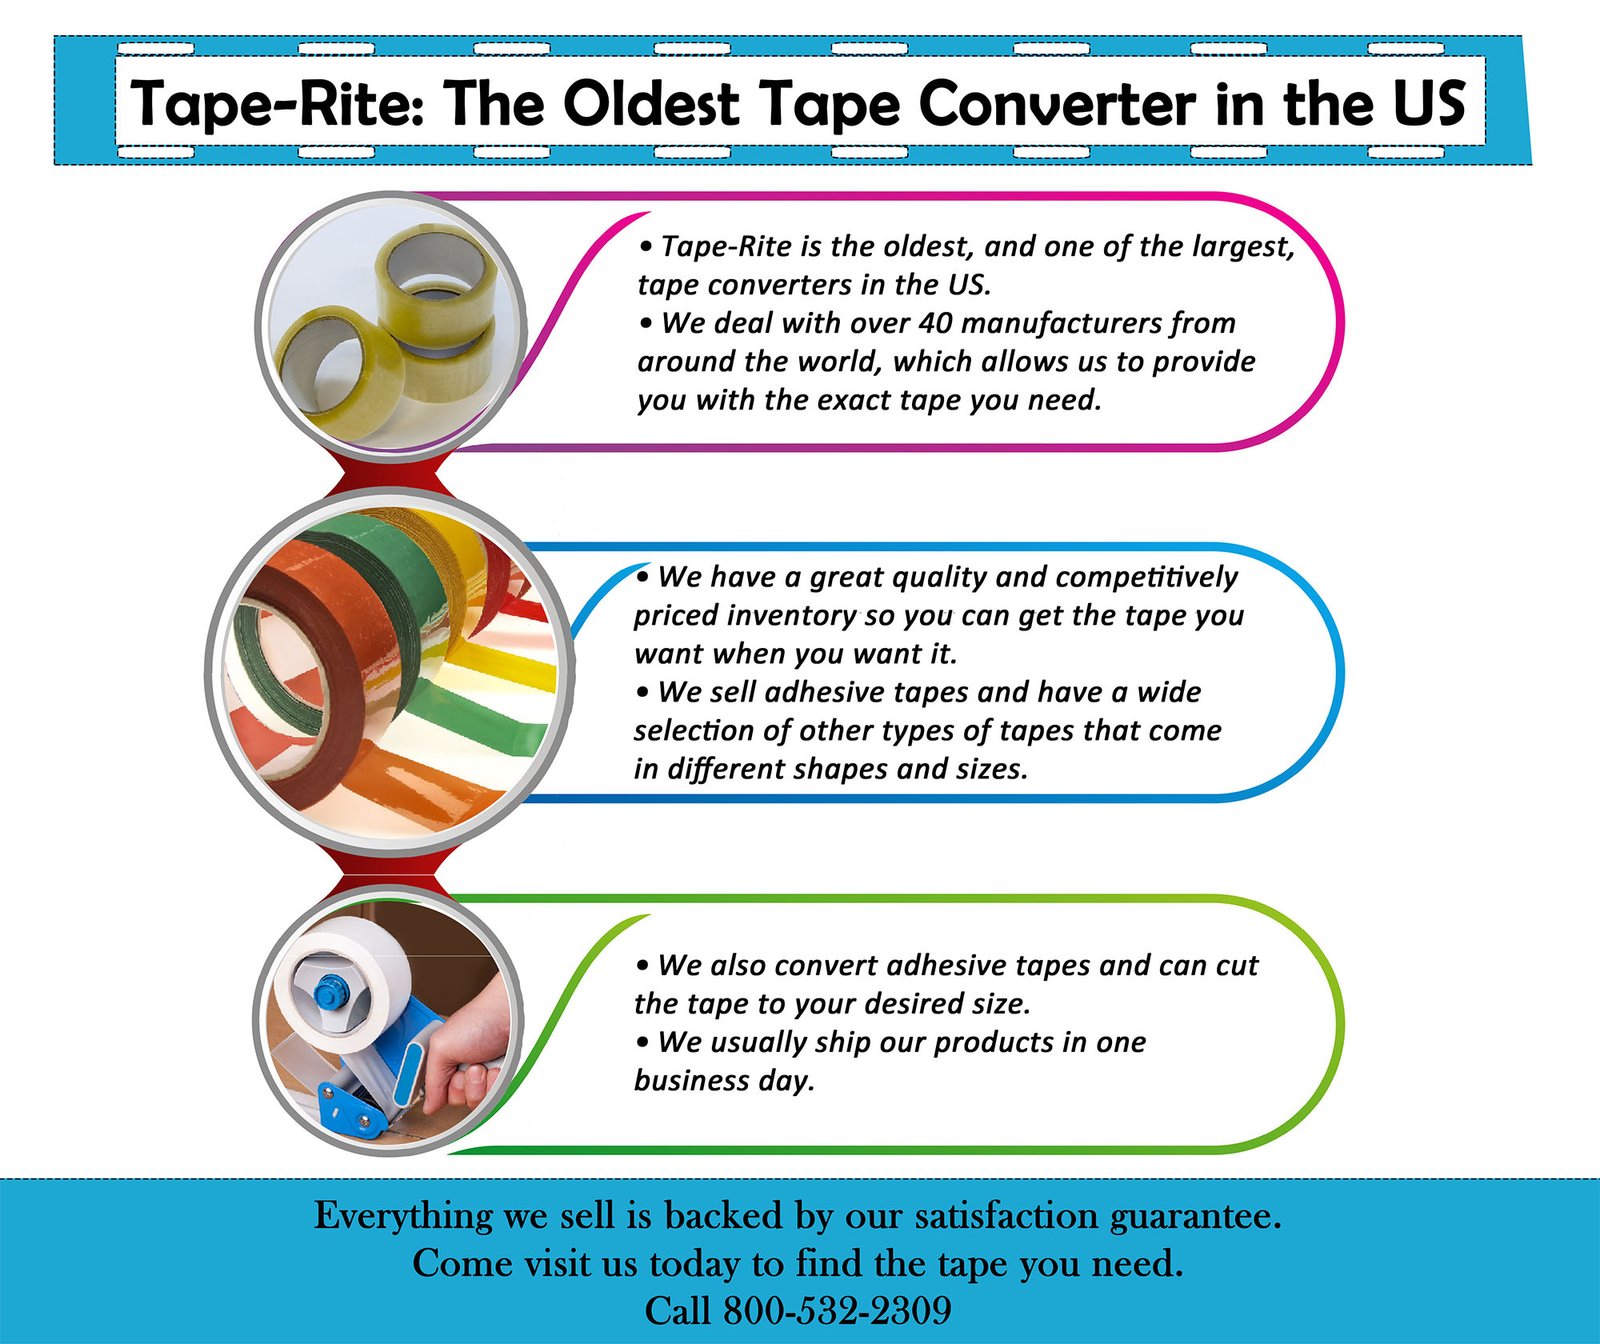 The Oldest Tape Converter in the US